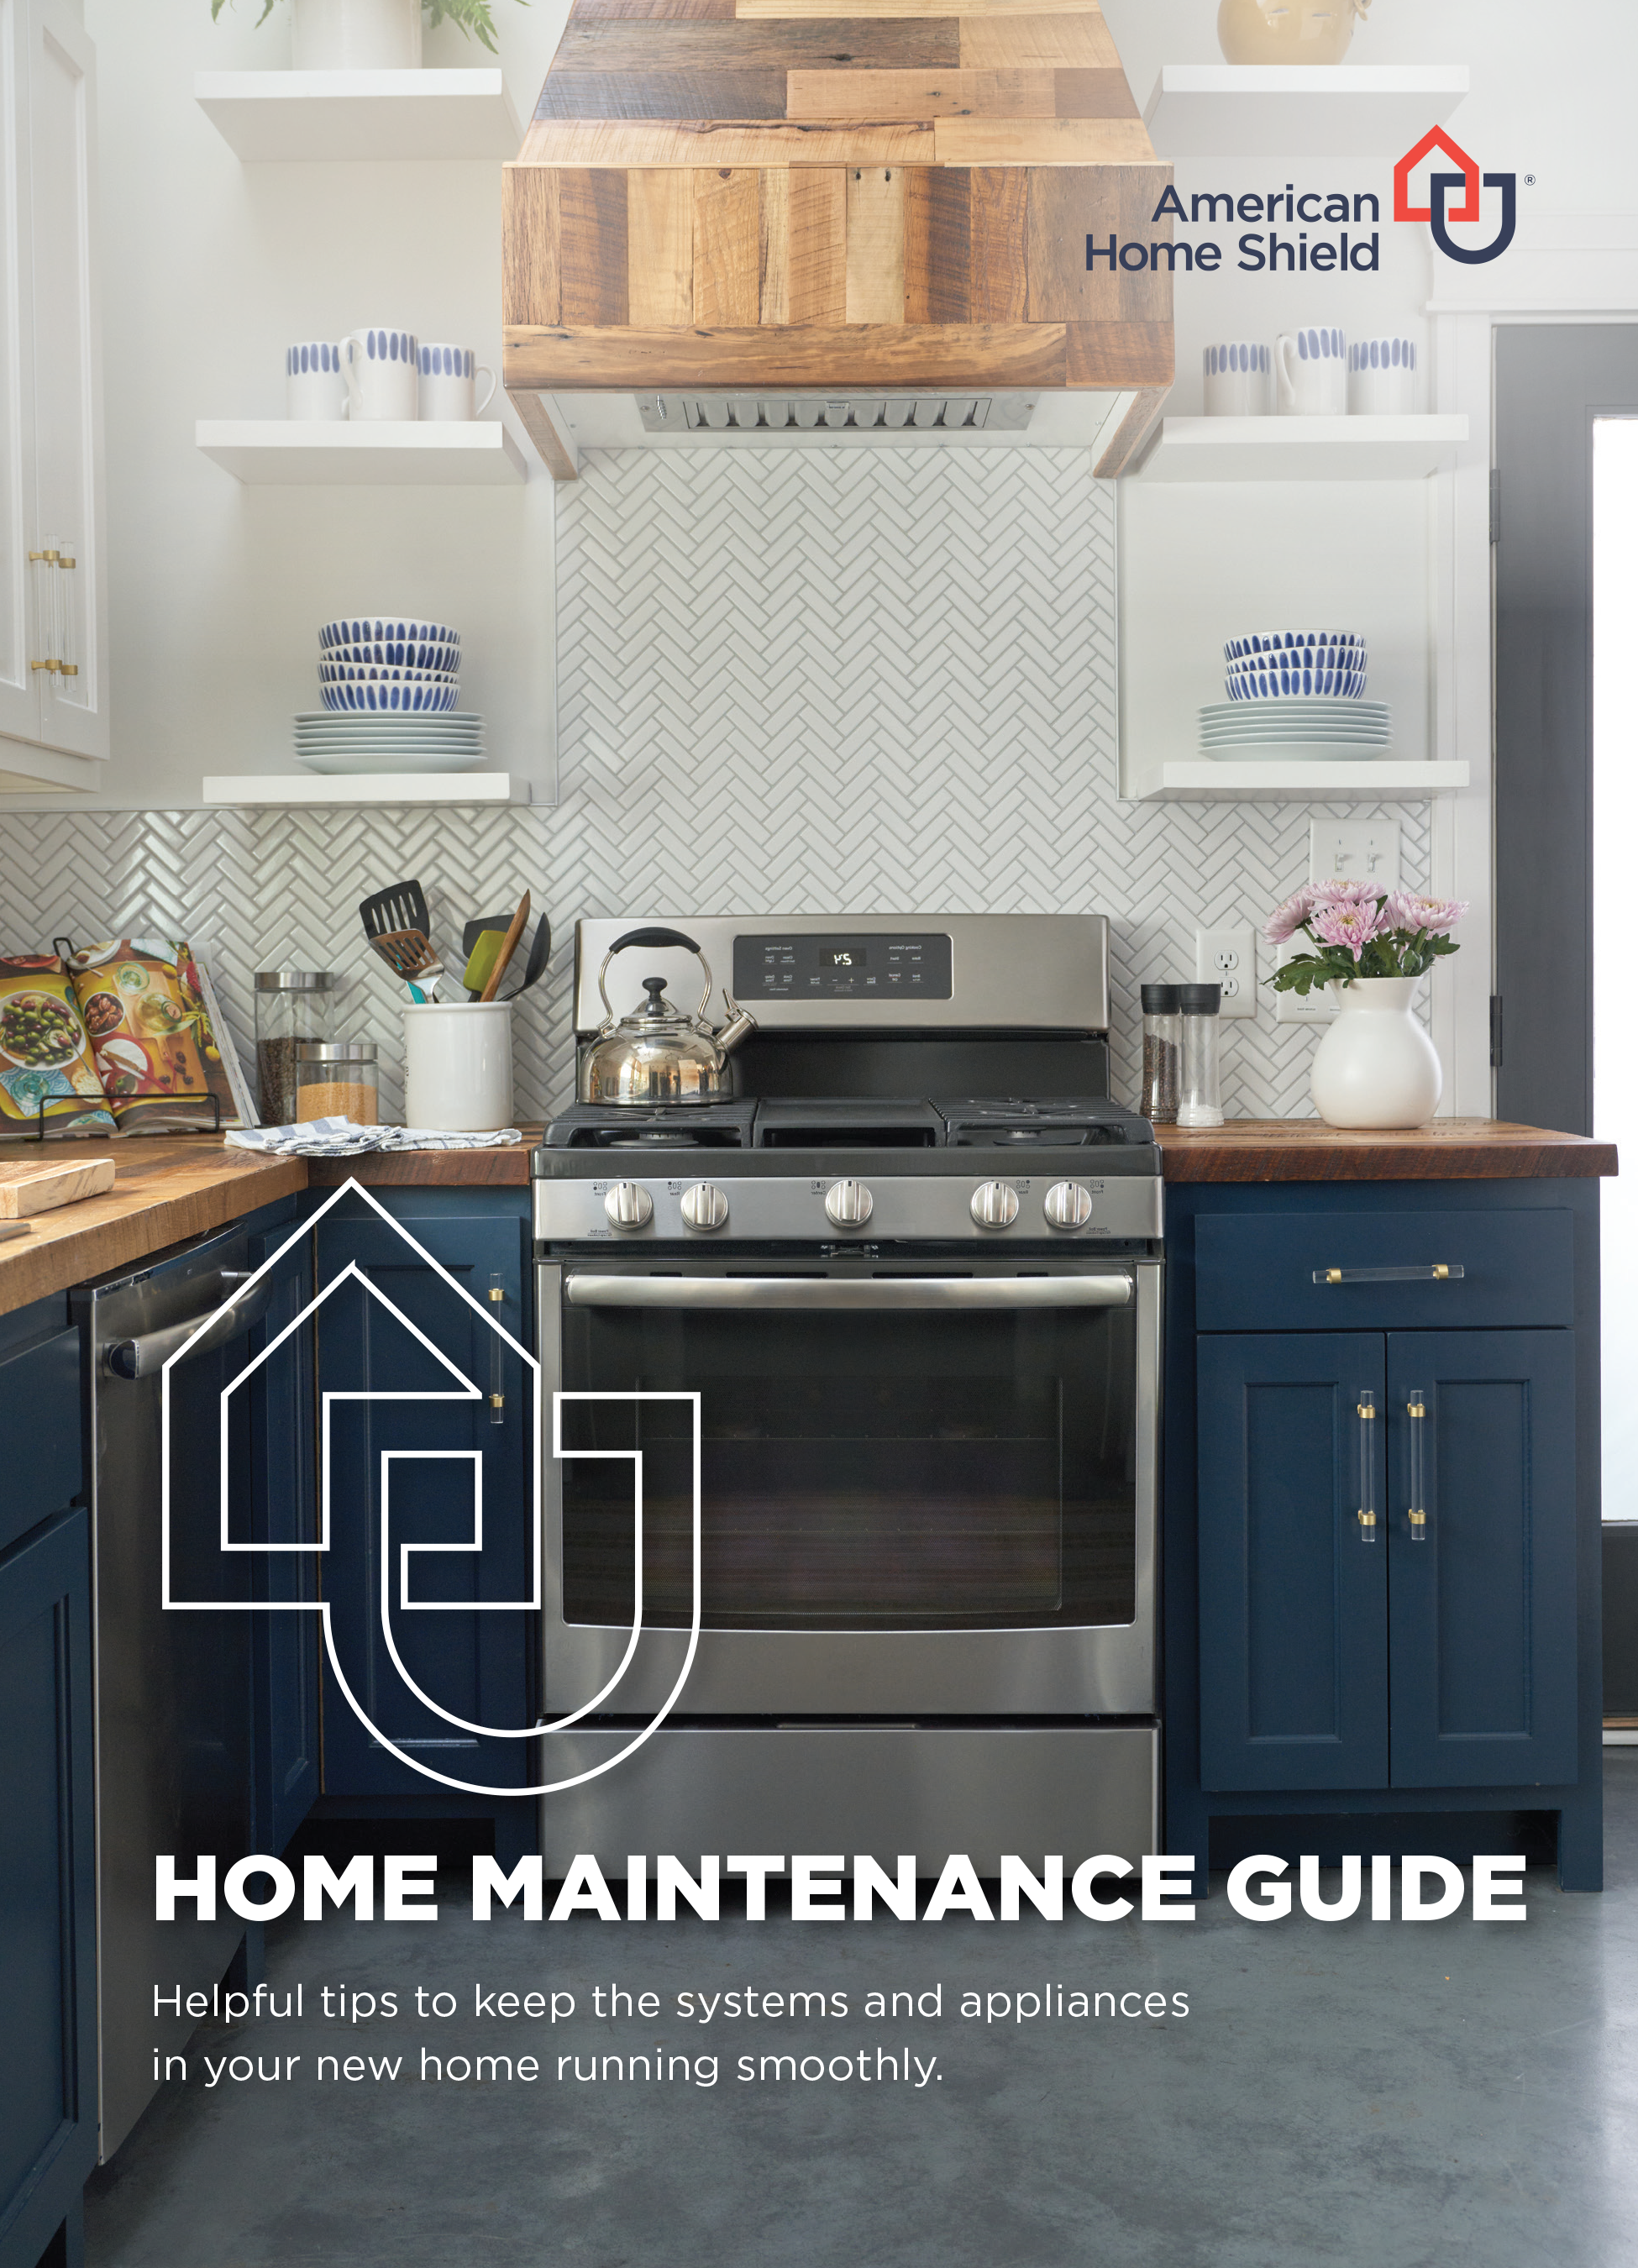 AHS-Home-Maintenance-Guide-1.png